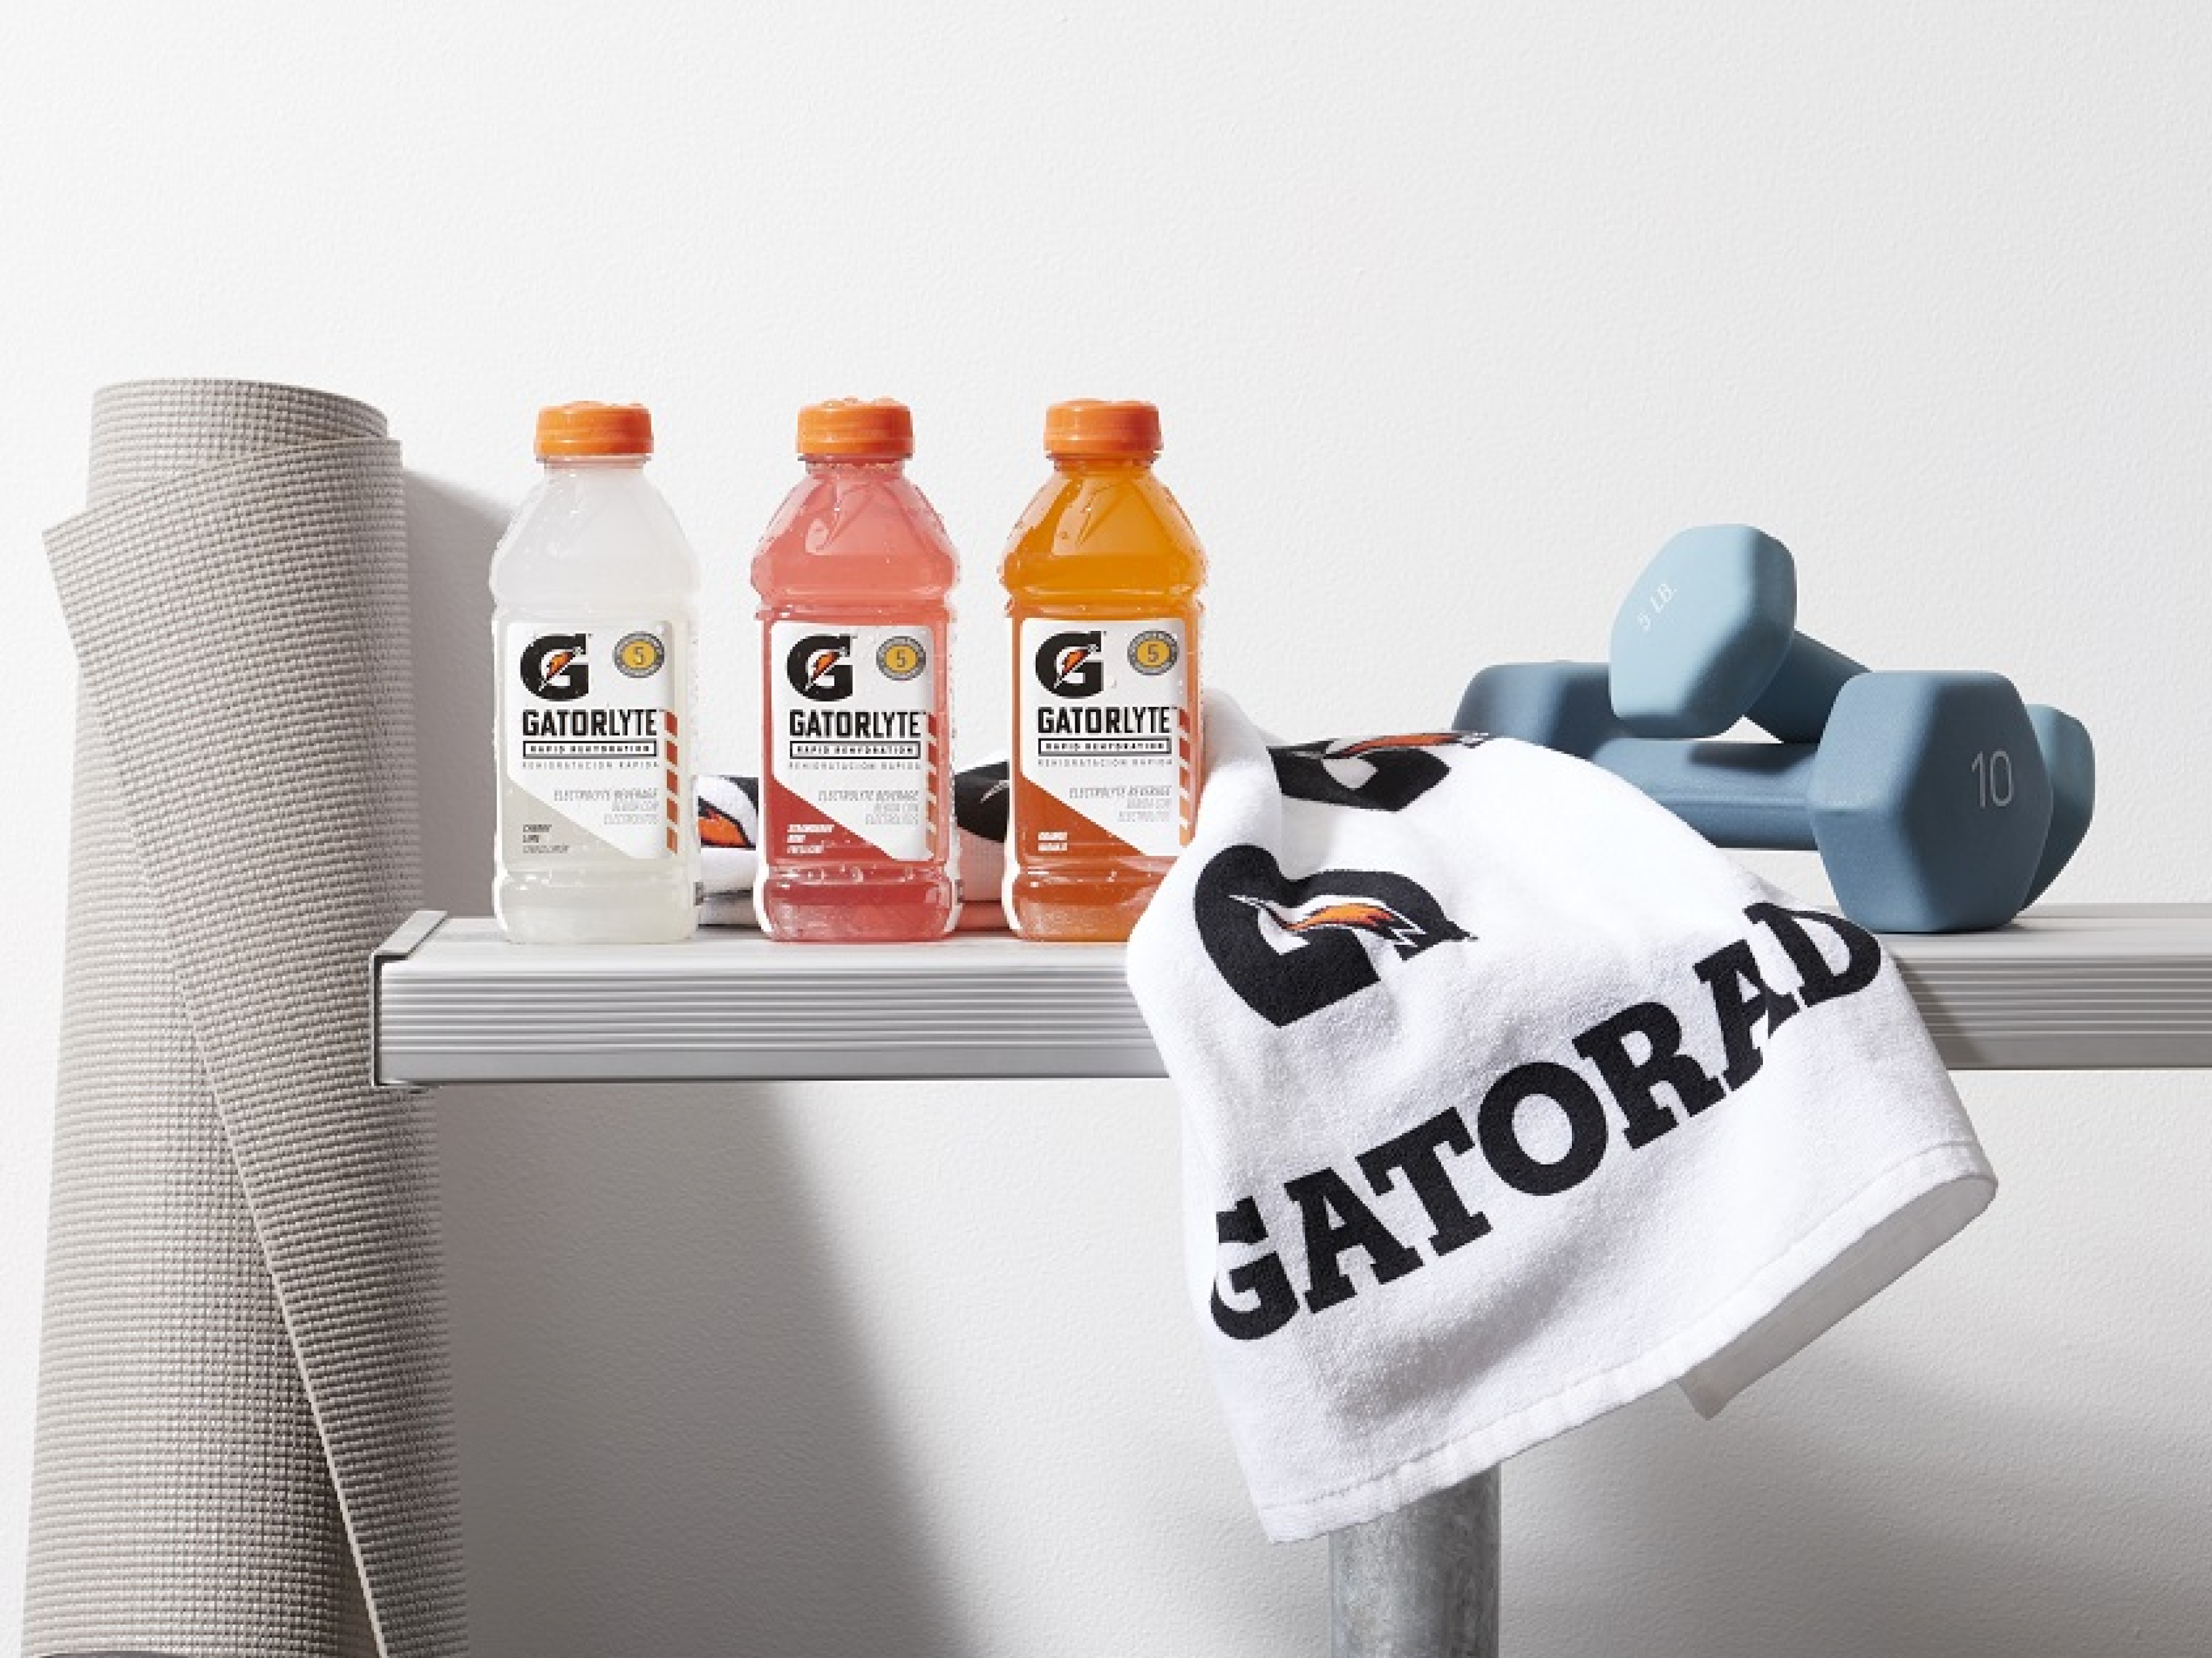 Three bottles of Gatorlyte ready to drink with Gx towel